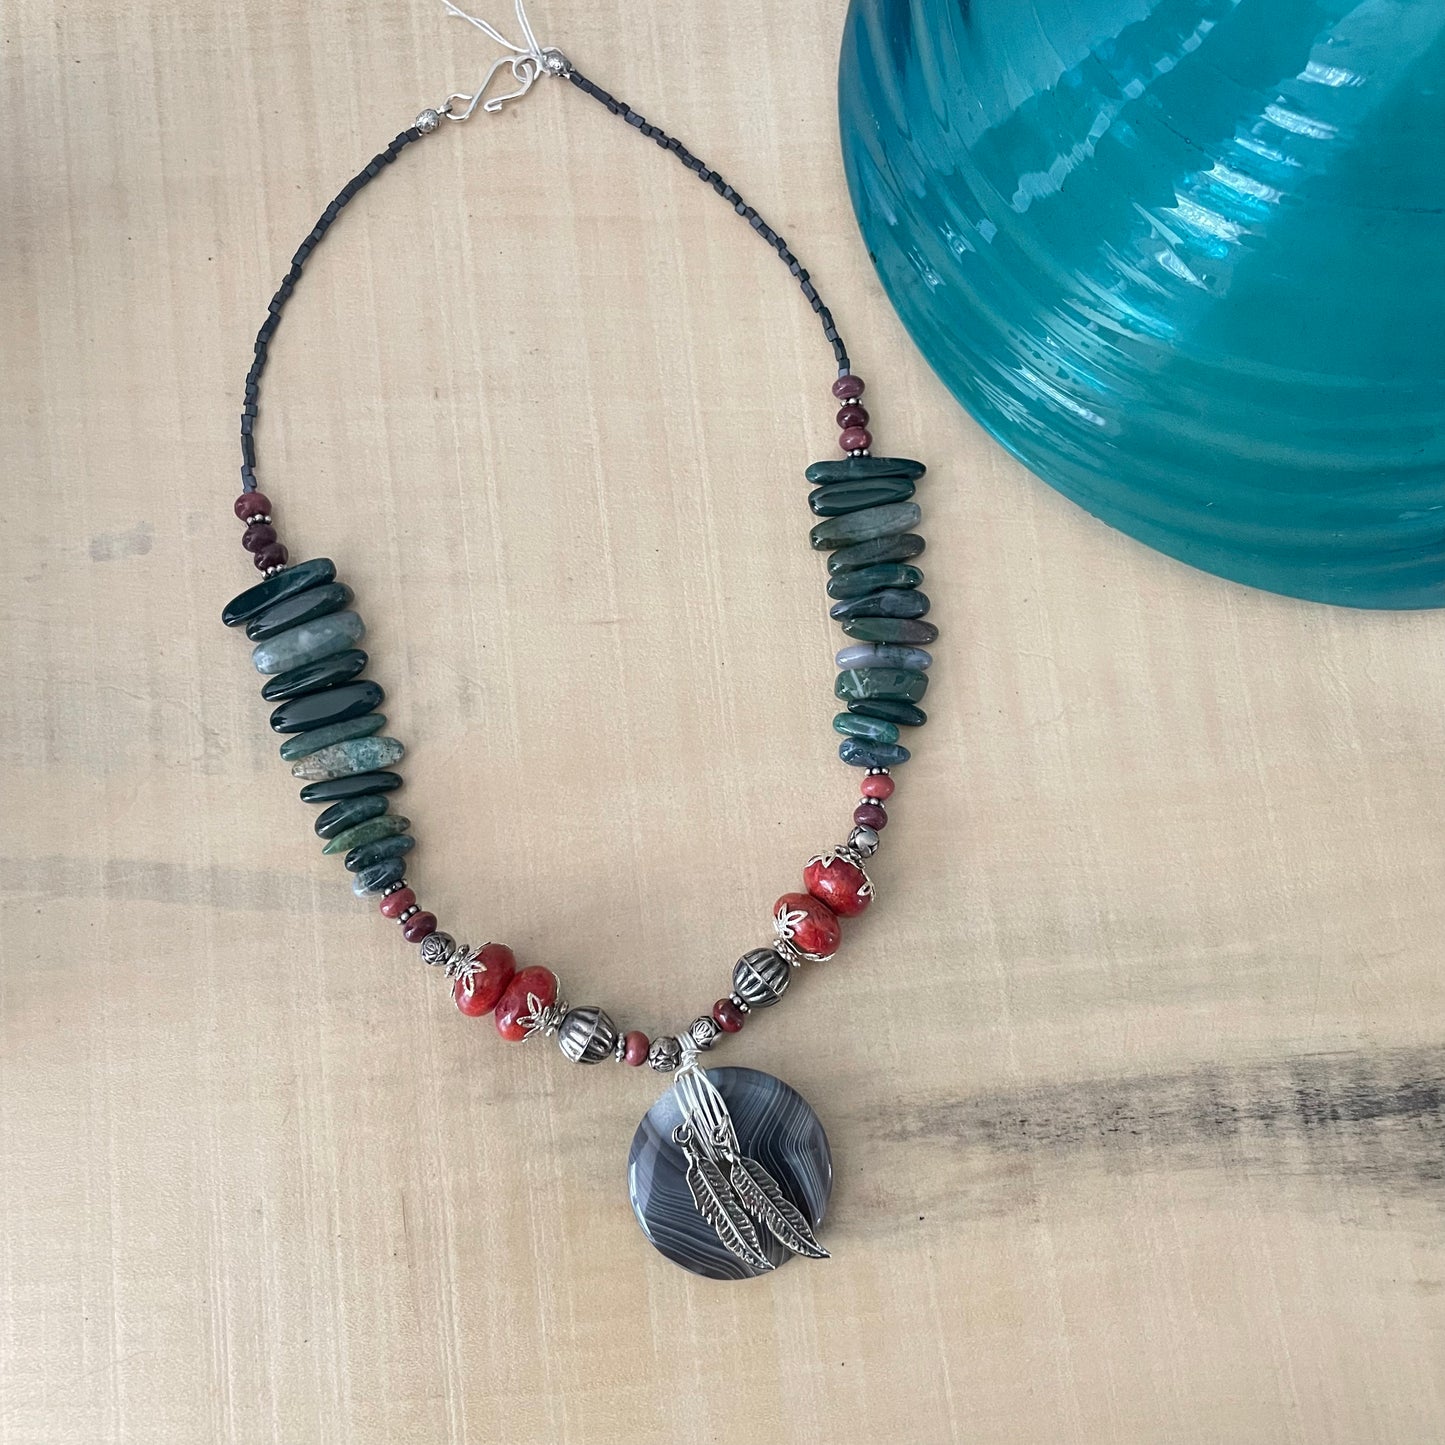 Swirling Agate & Feather Pendant Necklace 19" Jasper Coral Southwest Western Mixed Metal Wire Wrapped